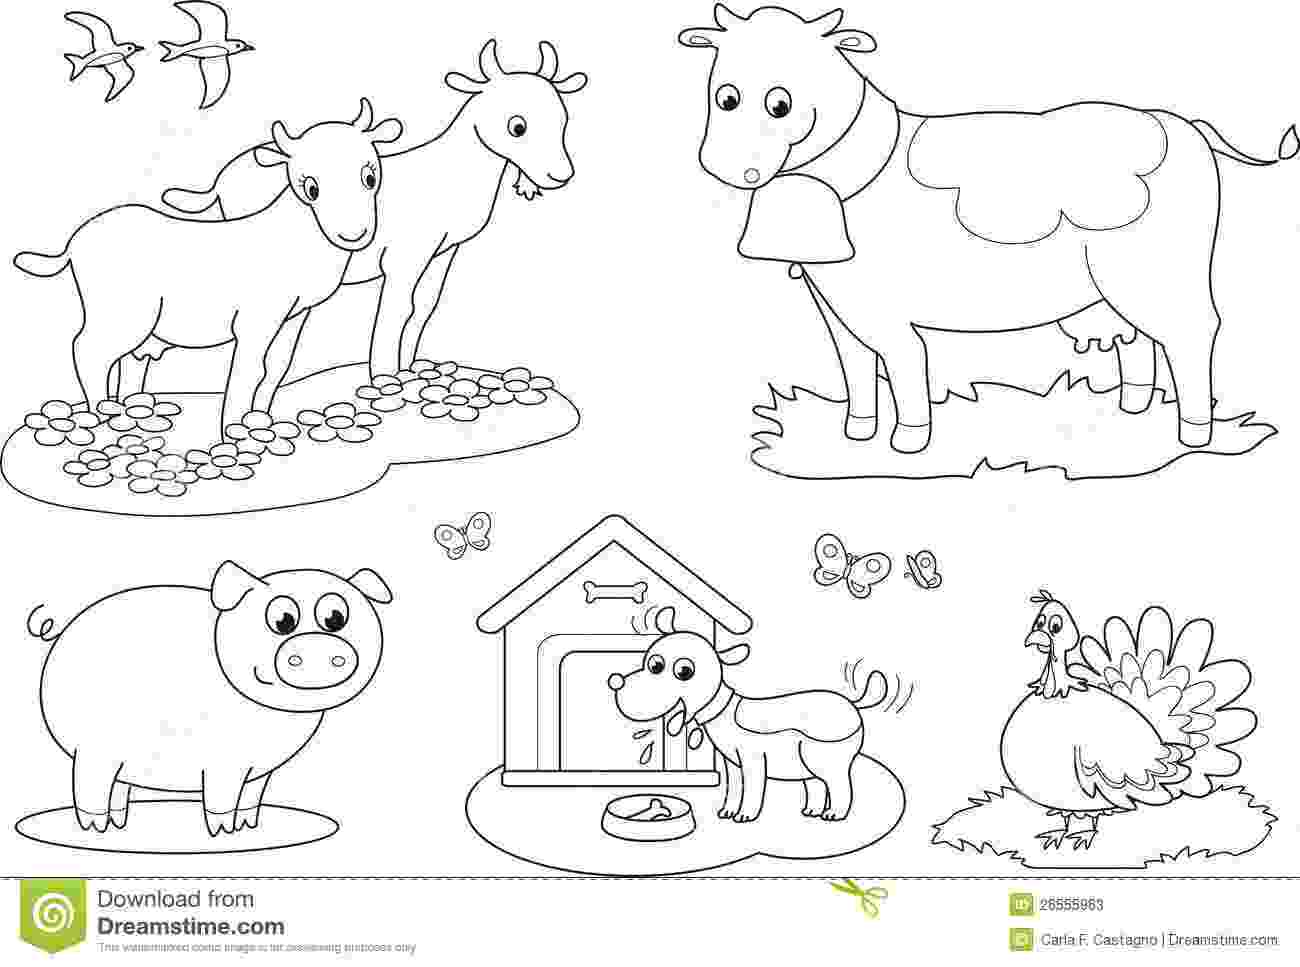 small colouring pictures of farm animals cute farm animal coloring pages google search my style of pictures small colouring animals farm 